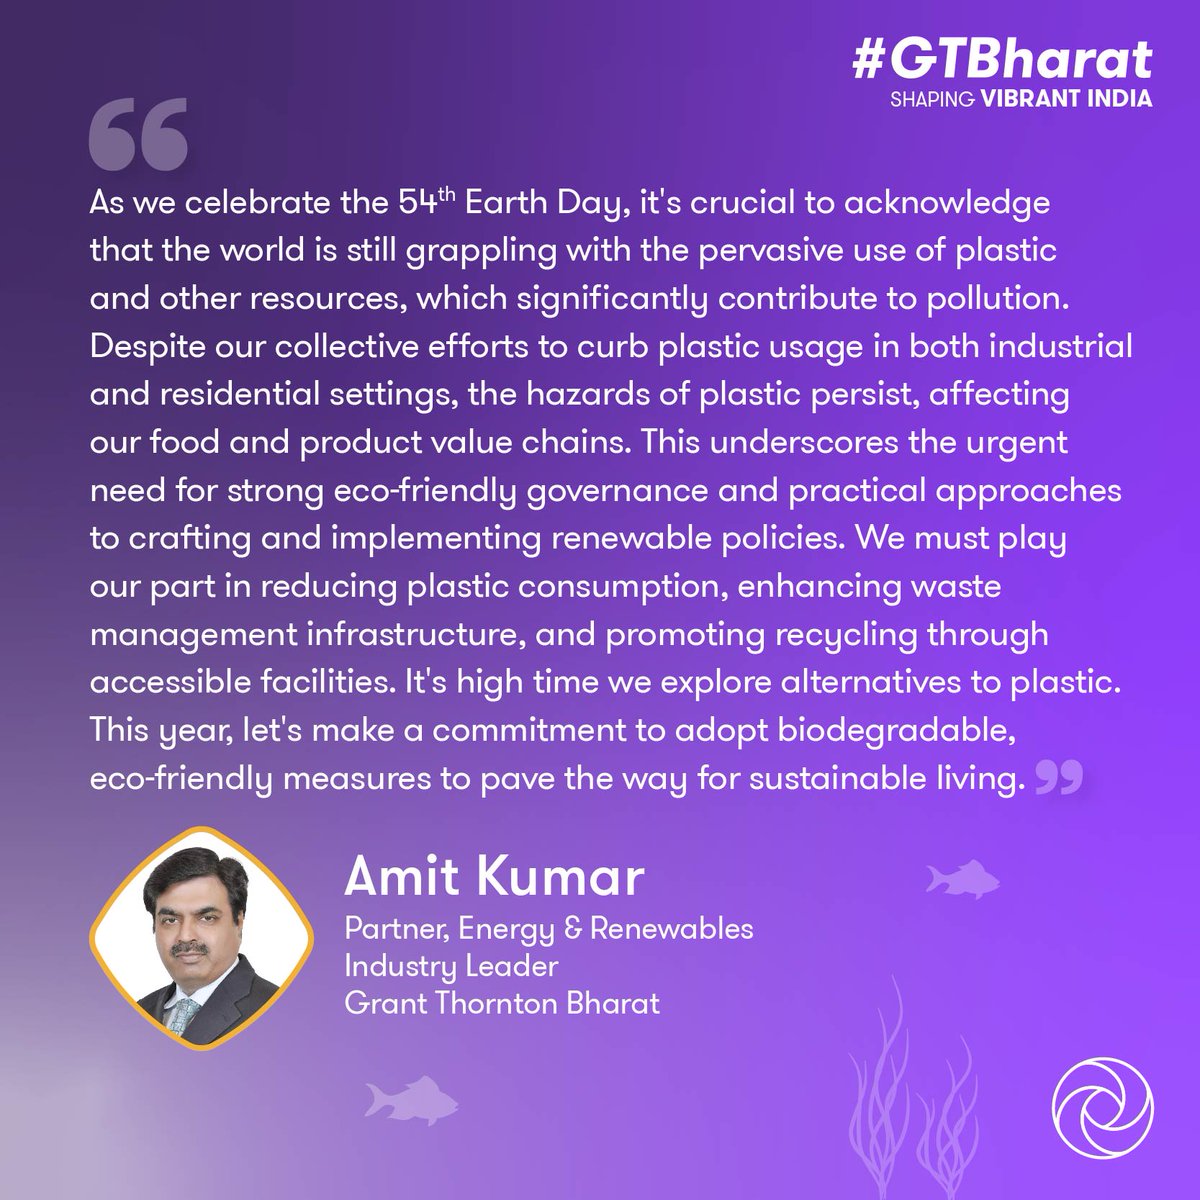 At #GTBharat, we support global movement against plastic pollution. This #EarthDay, under the theme 'Planet vs Plastics,' we invite businesses, clients and communities to join us in combating this environmental issue that threatens our ecosystems, wildlife and collective health.